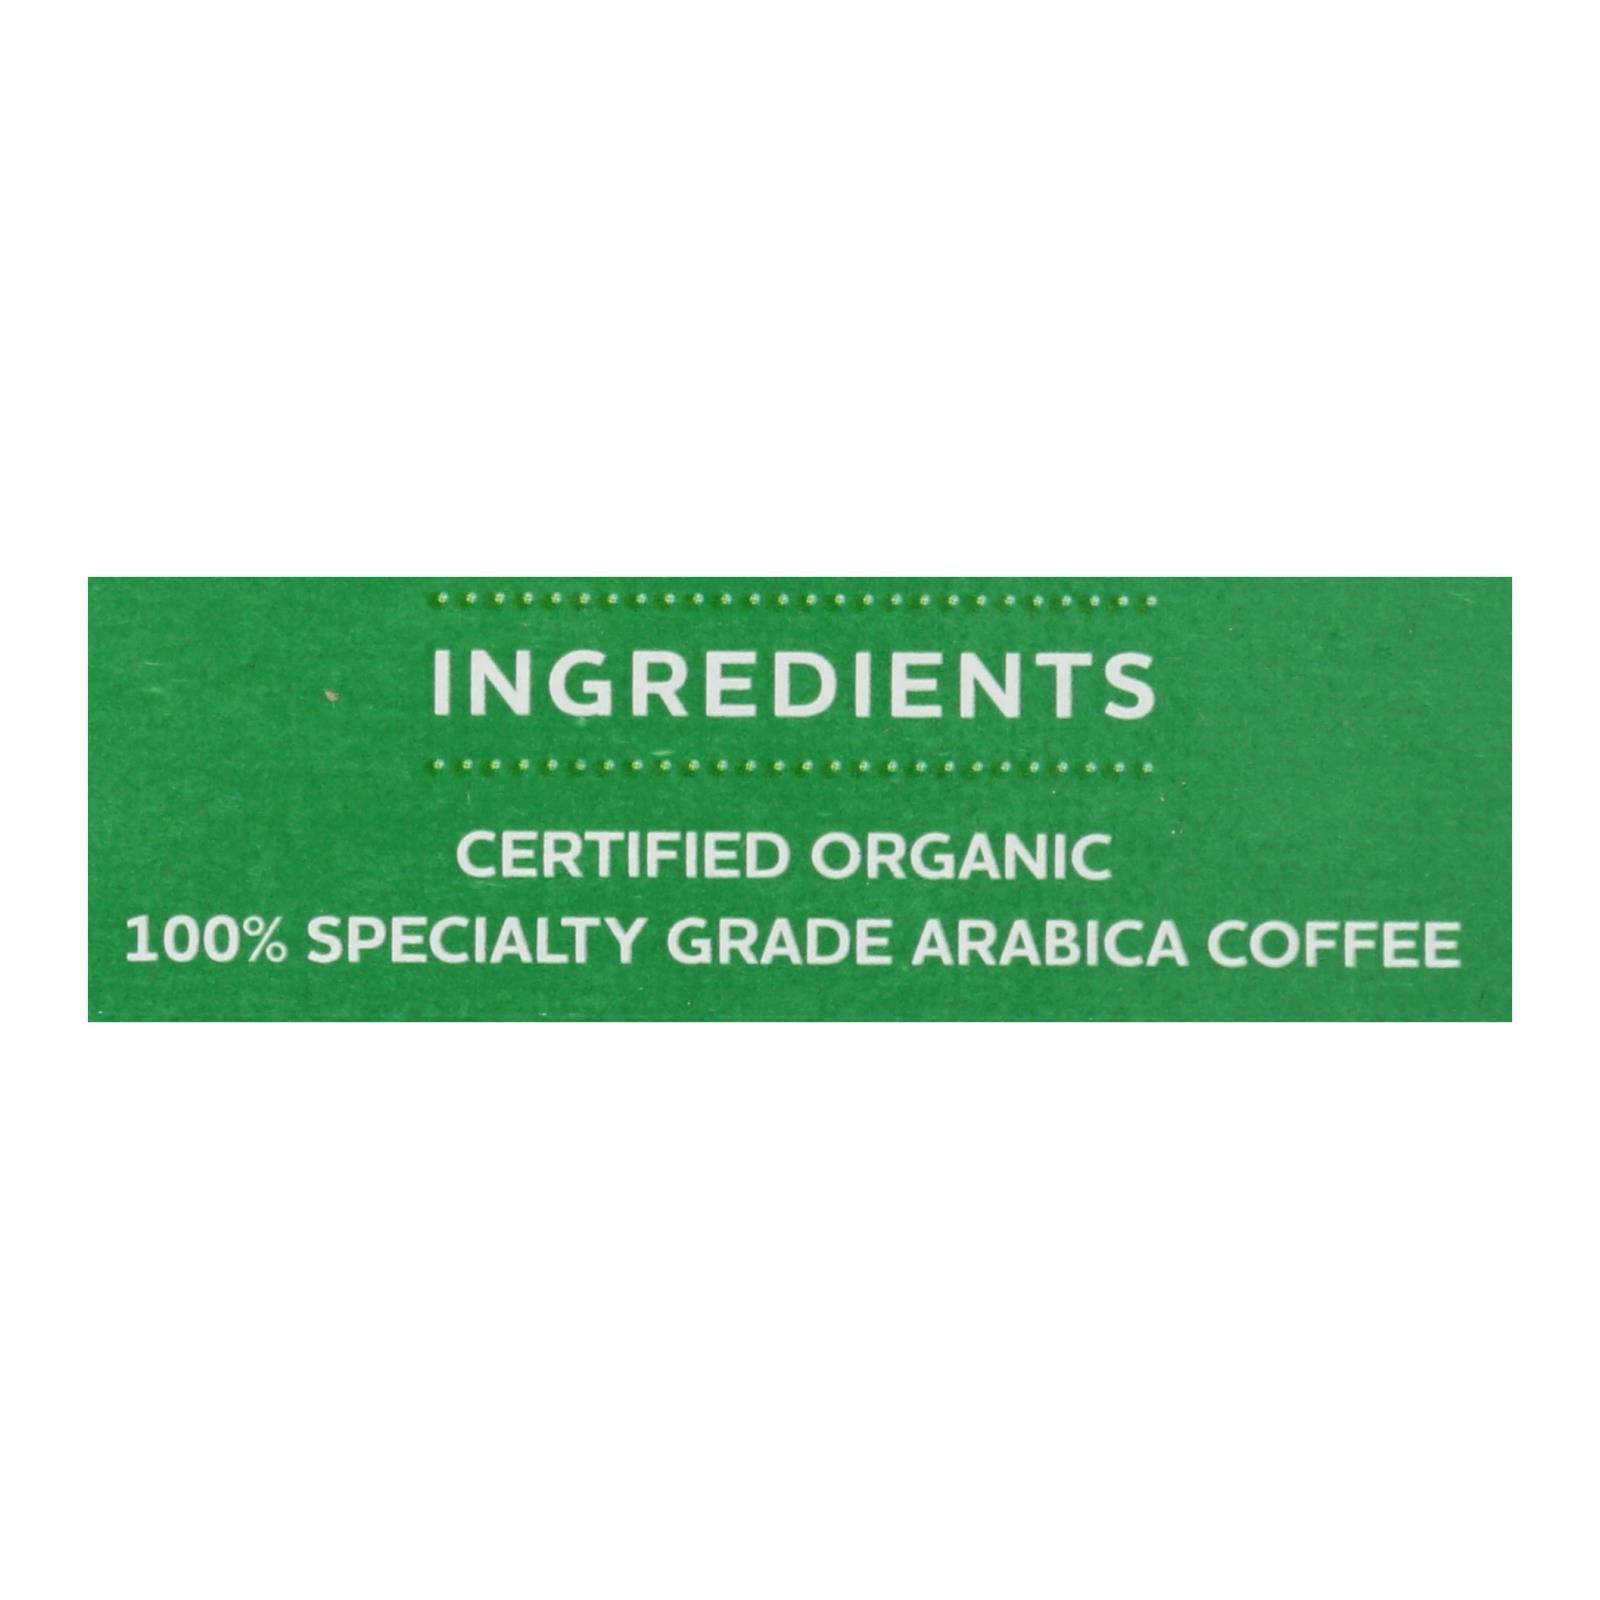 Cameron’s Specialty Coffee, Organic French Roast  - Case Of 6 - 12 Ct